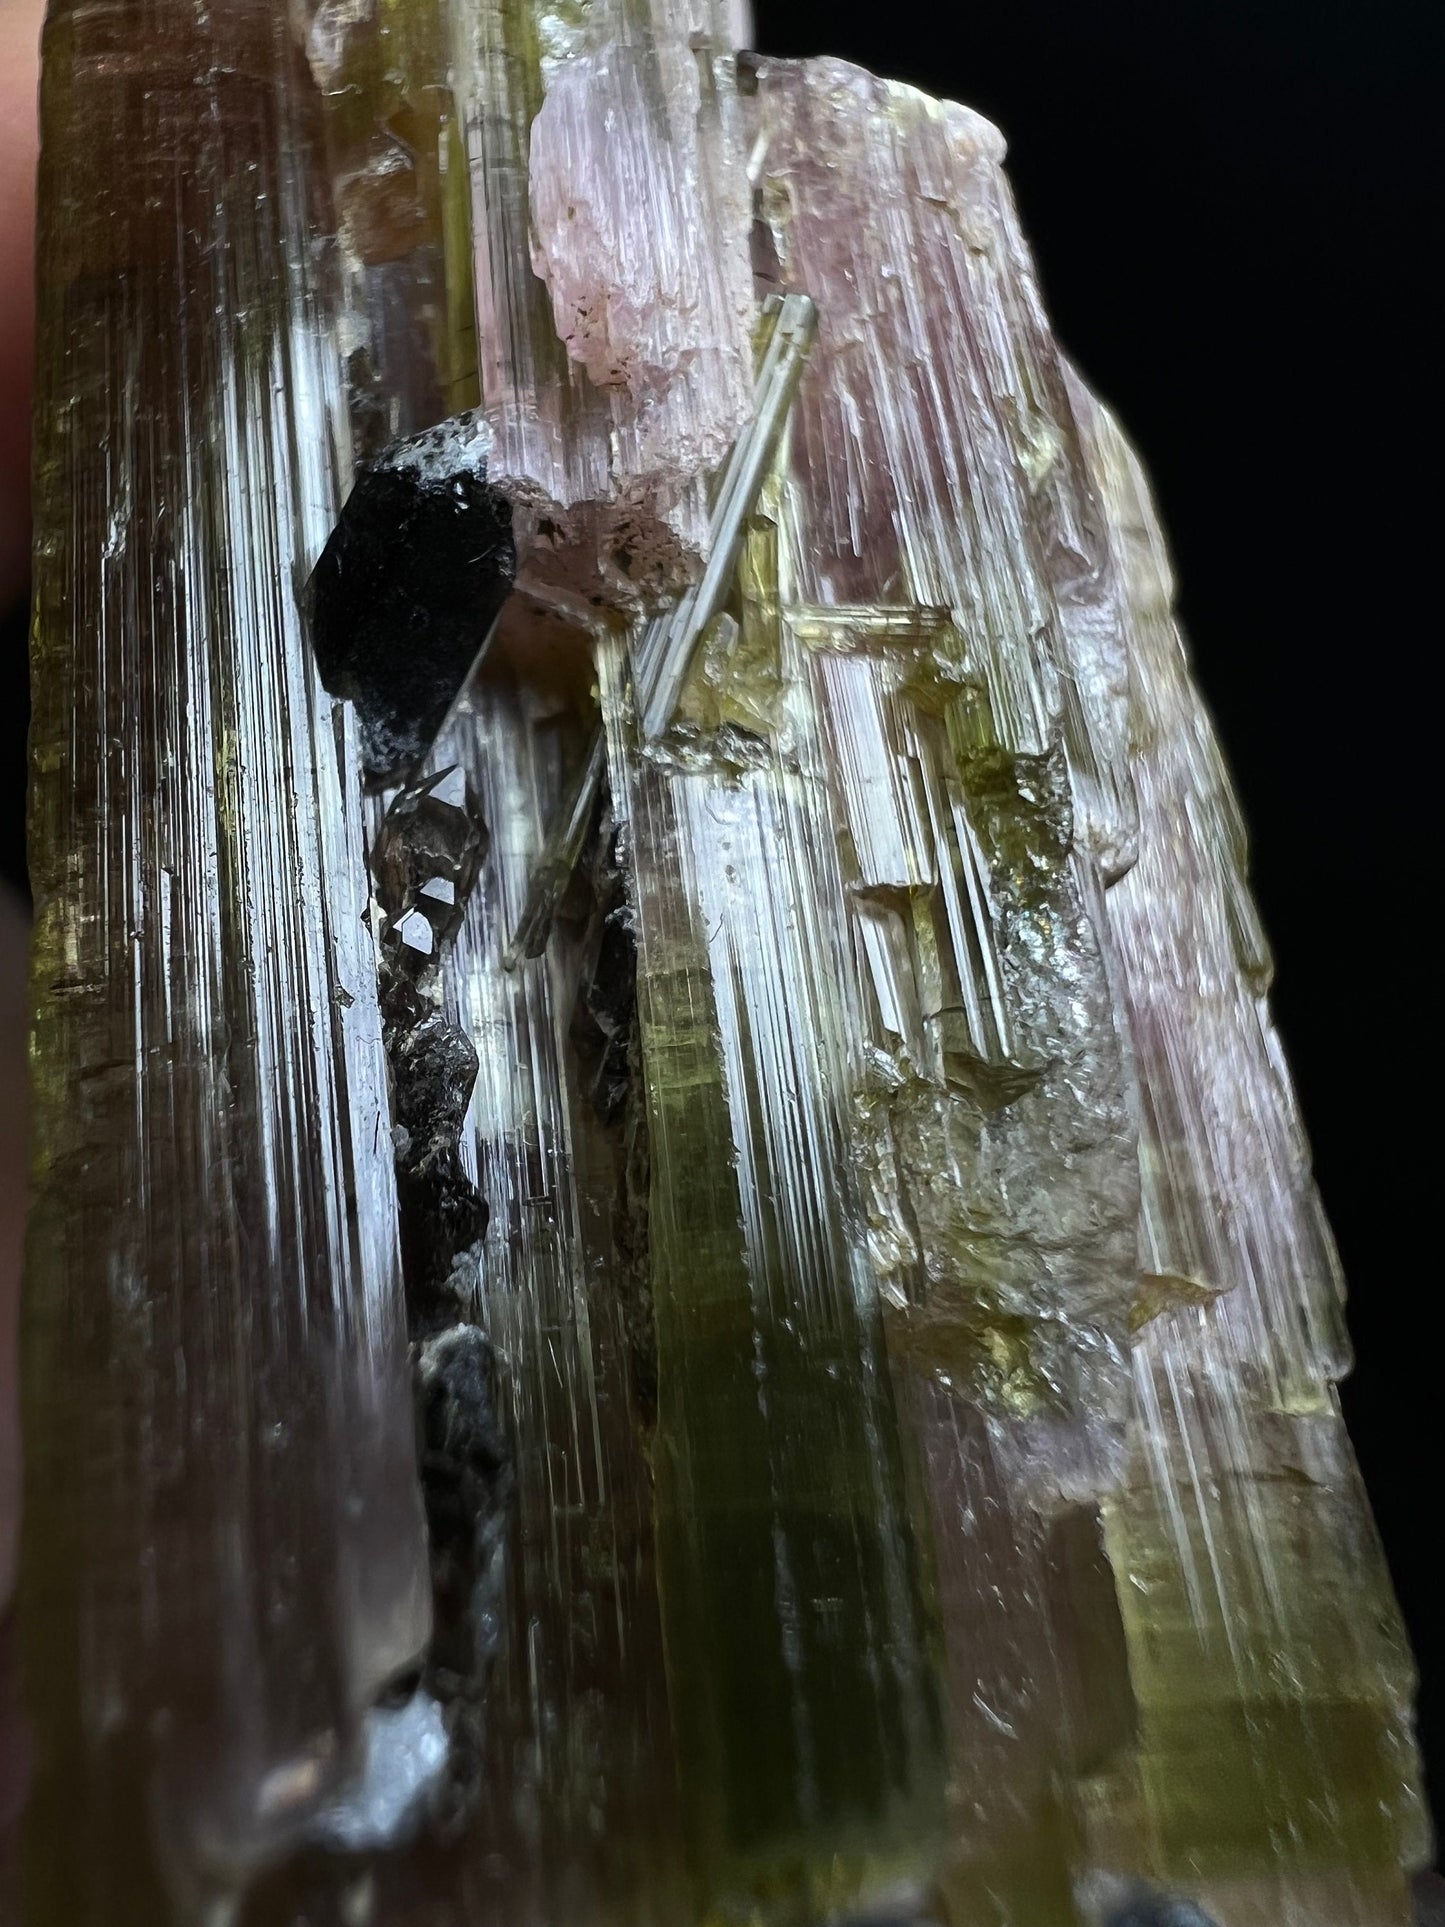 Single Termination Watermelon Tourmaline With Black Tourmaline Piercing Through From Brazil (Self Healed) - Collectors Piece